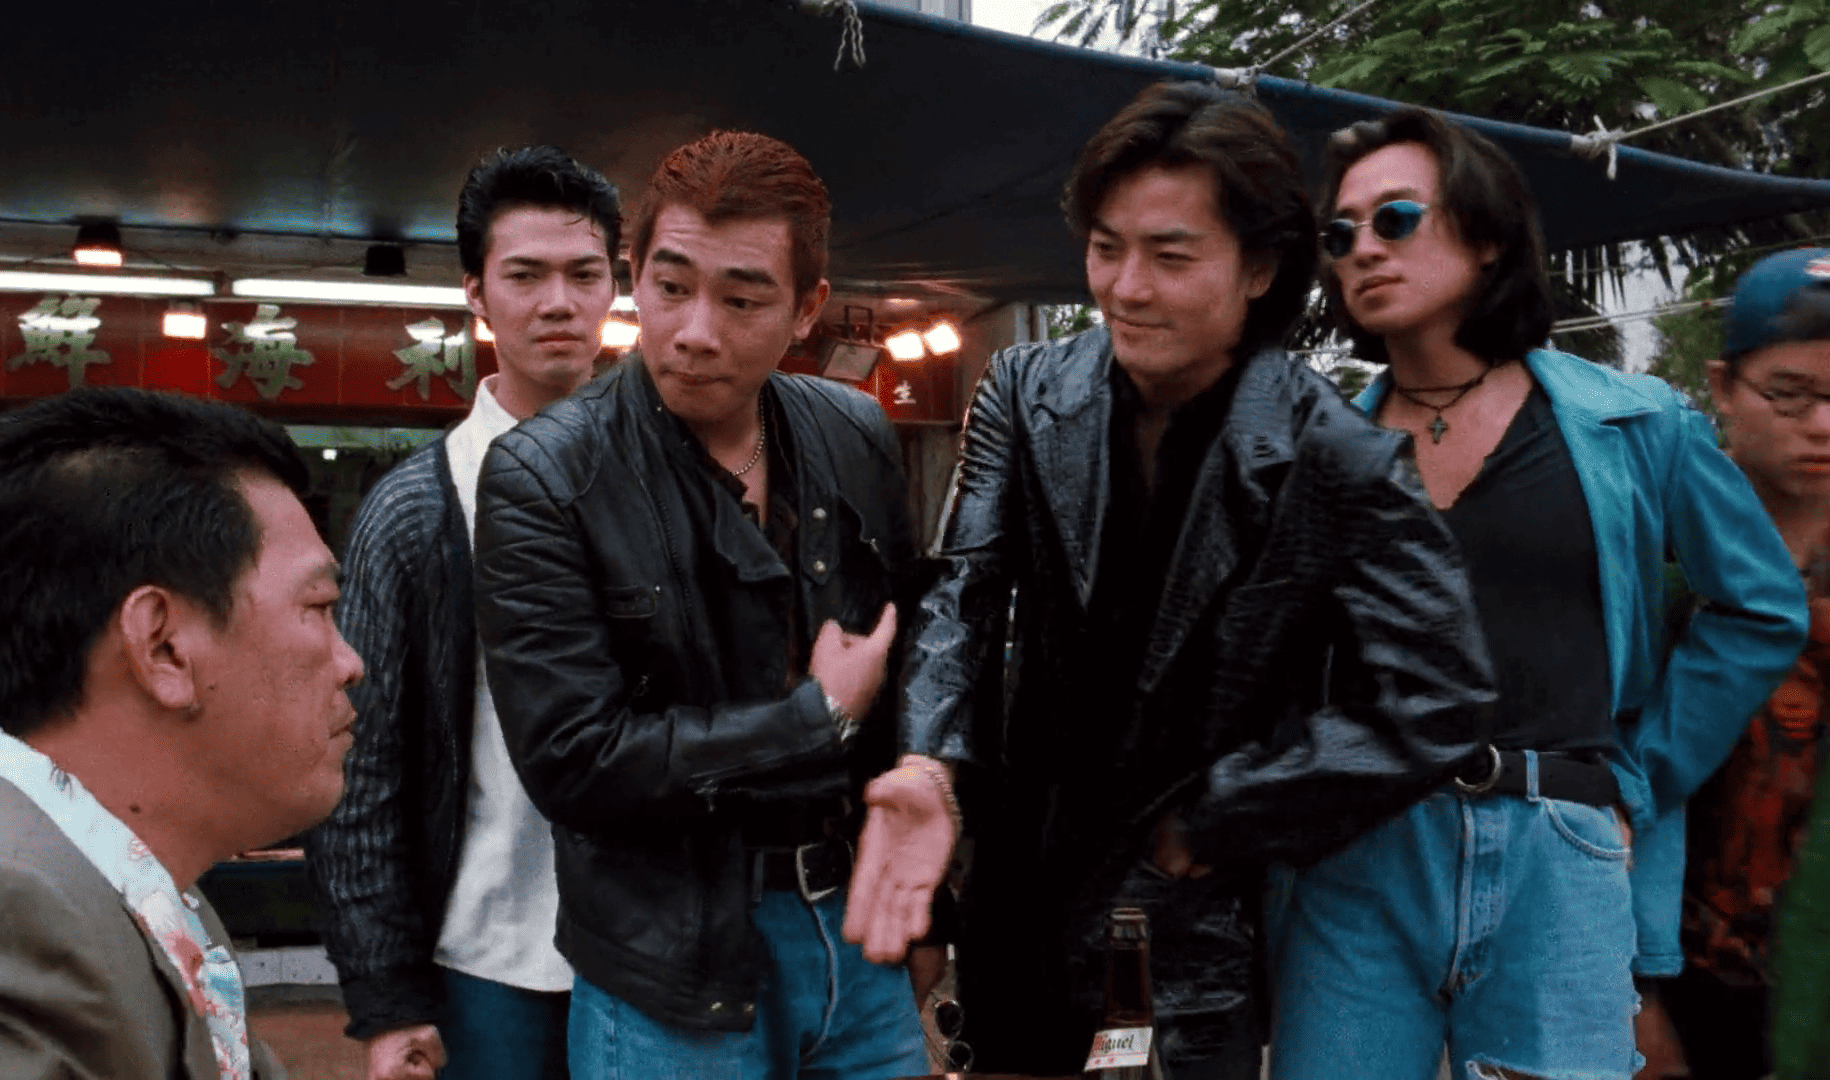 Film Review: Young and Dangerous (1996) by Andrew Lau